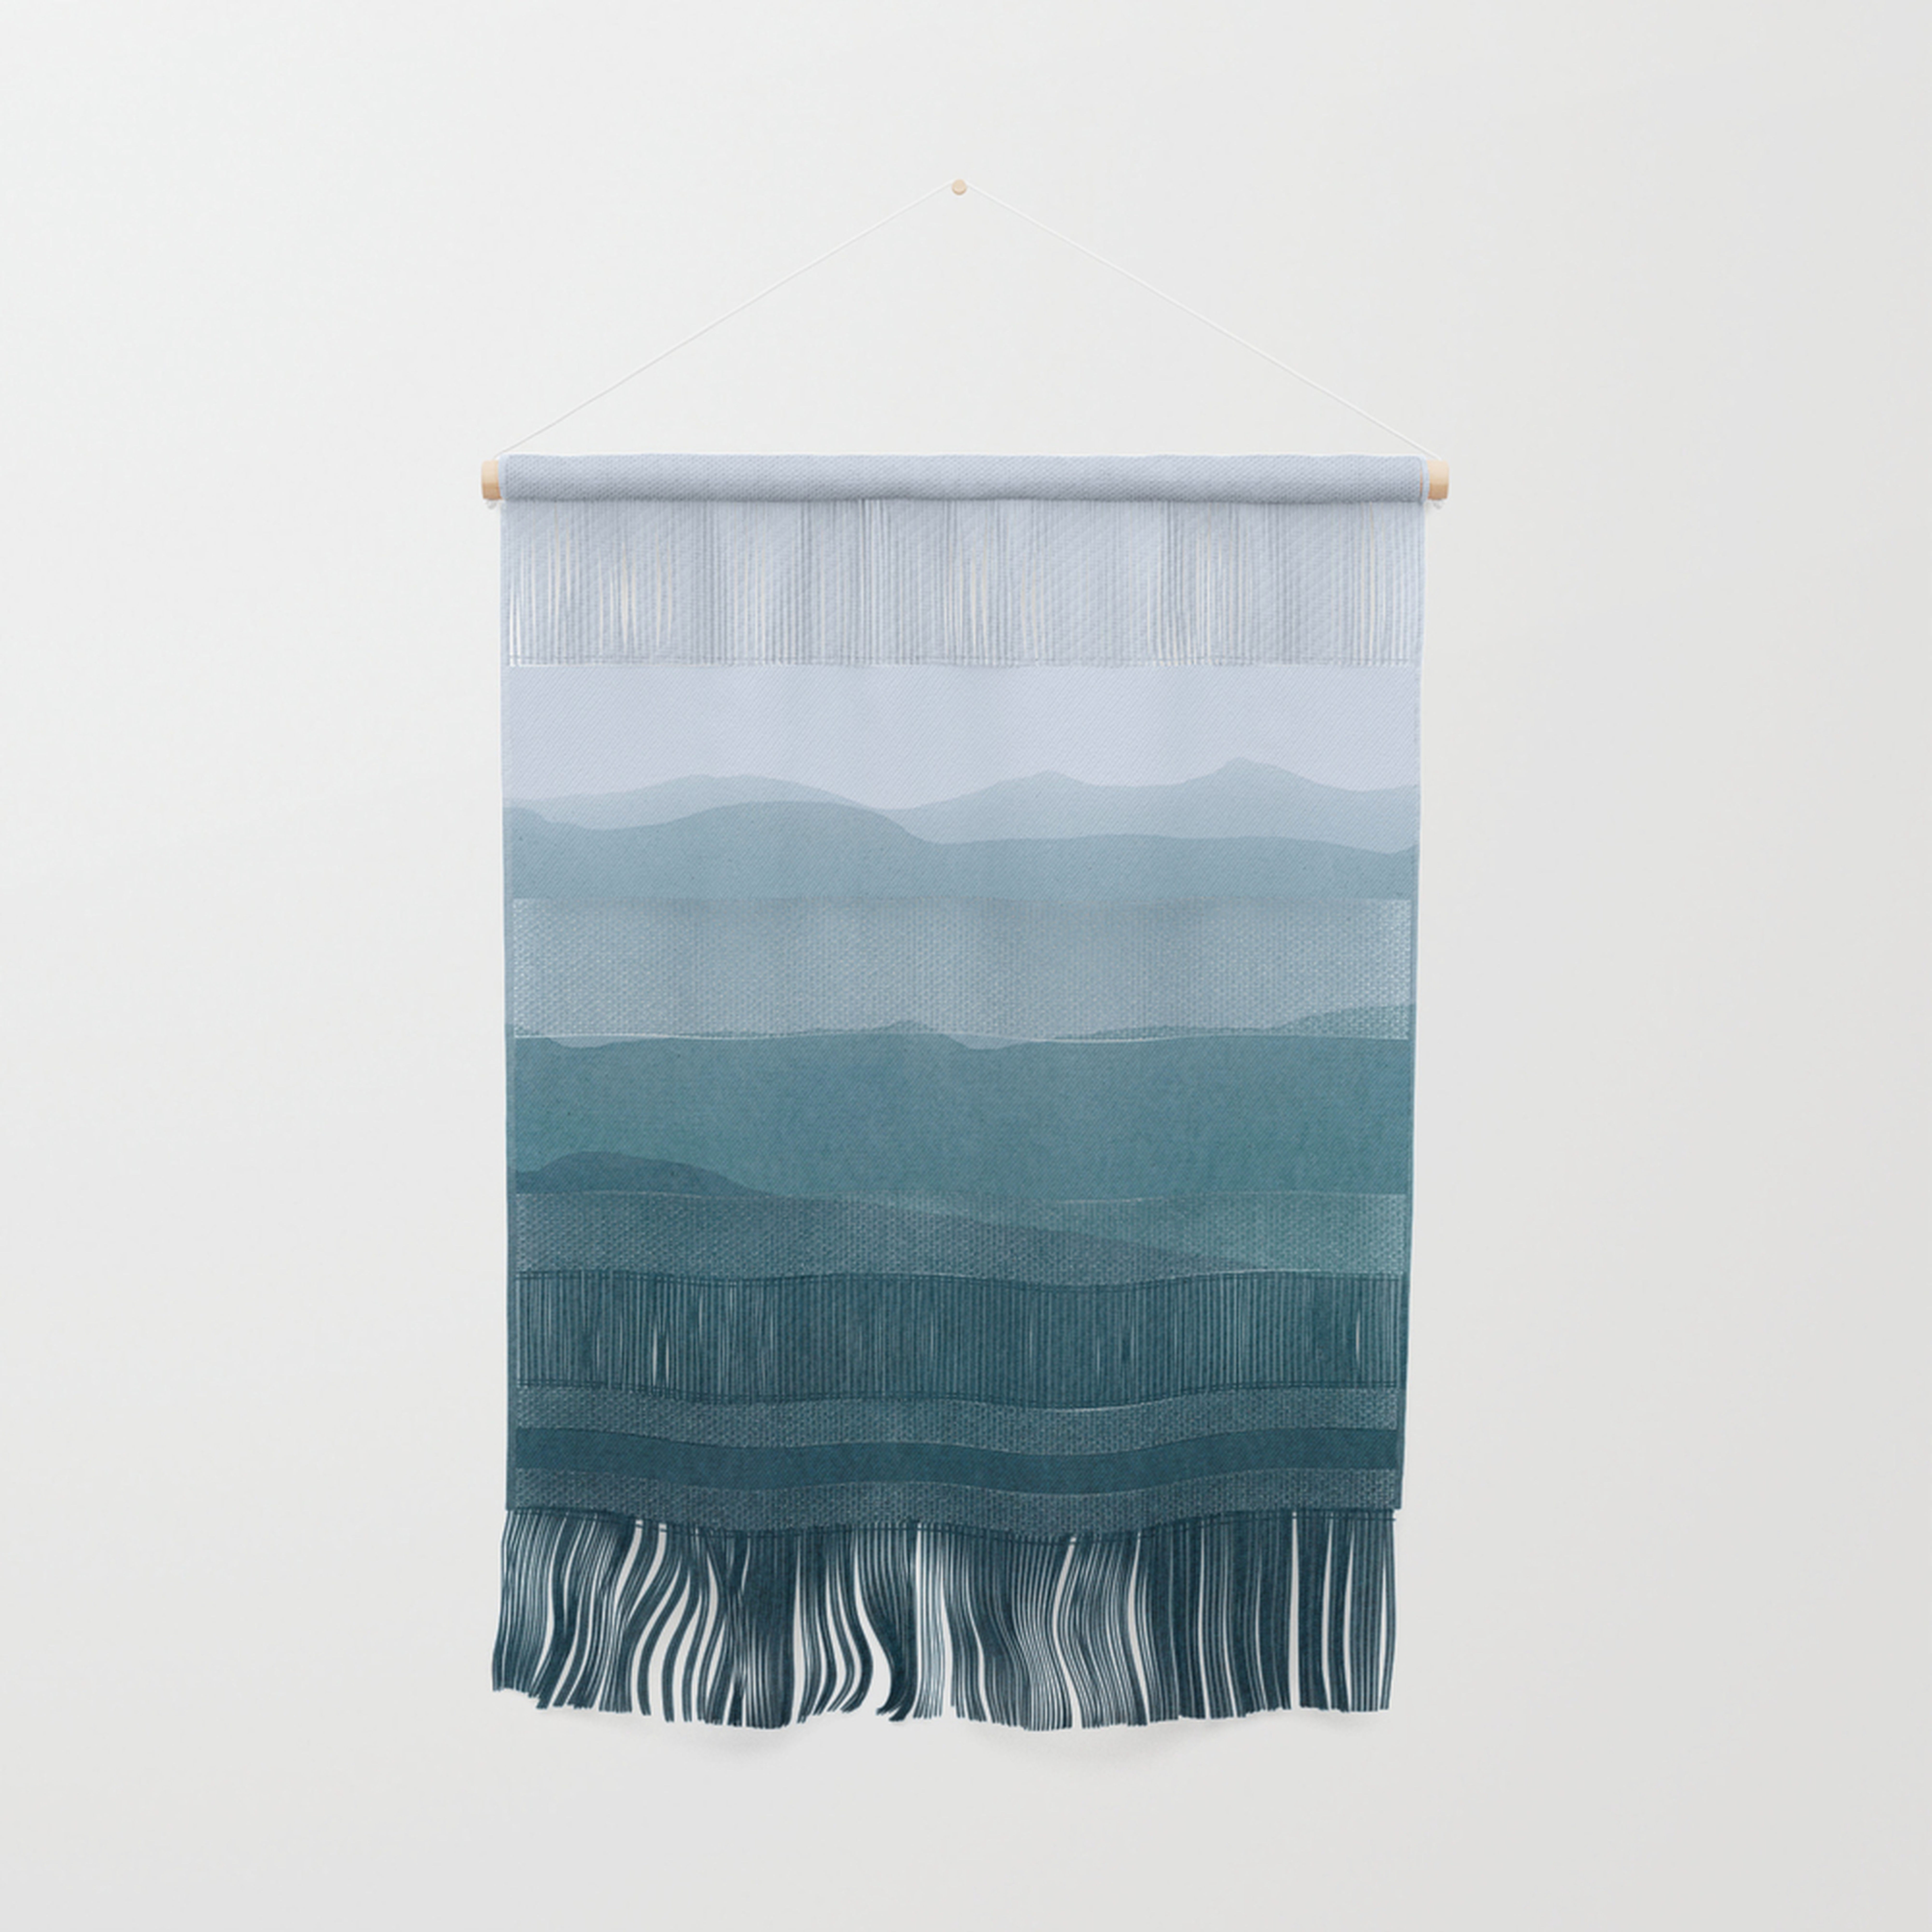 Gradient Landscape Wall Hanging by Iris Lehnhardt - Large 23.25" x 31.5" - Society6